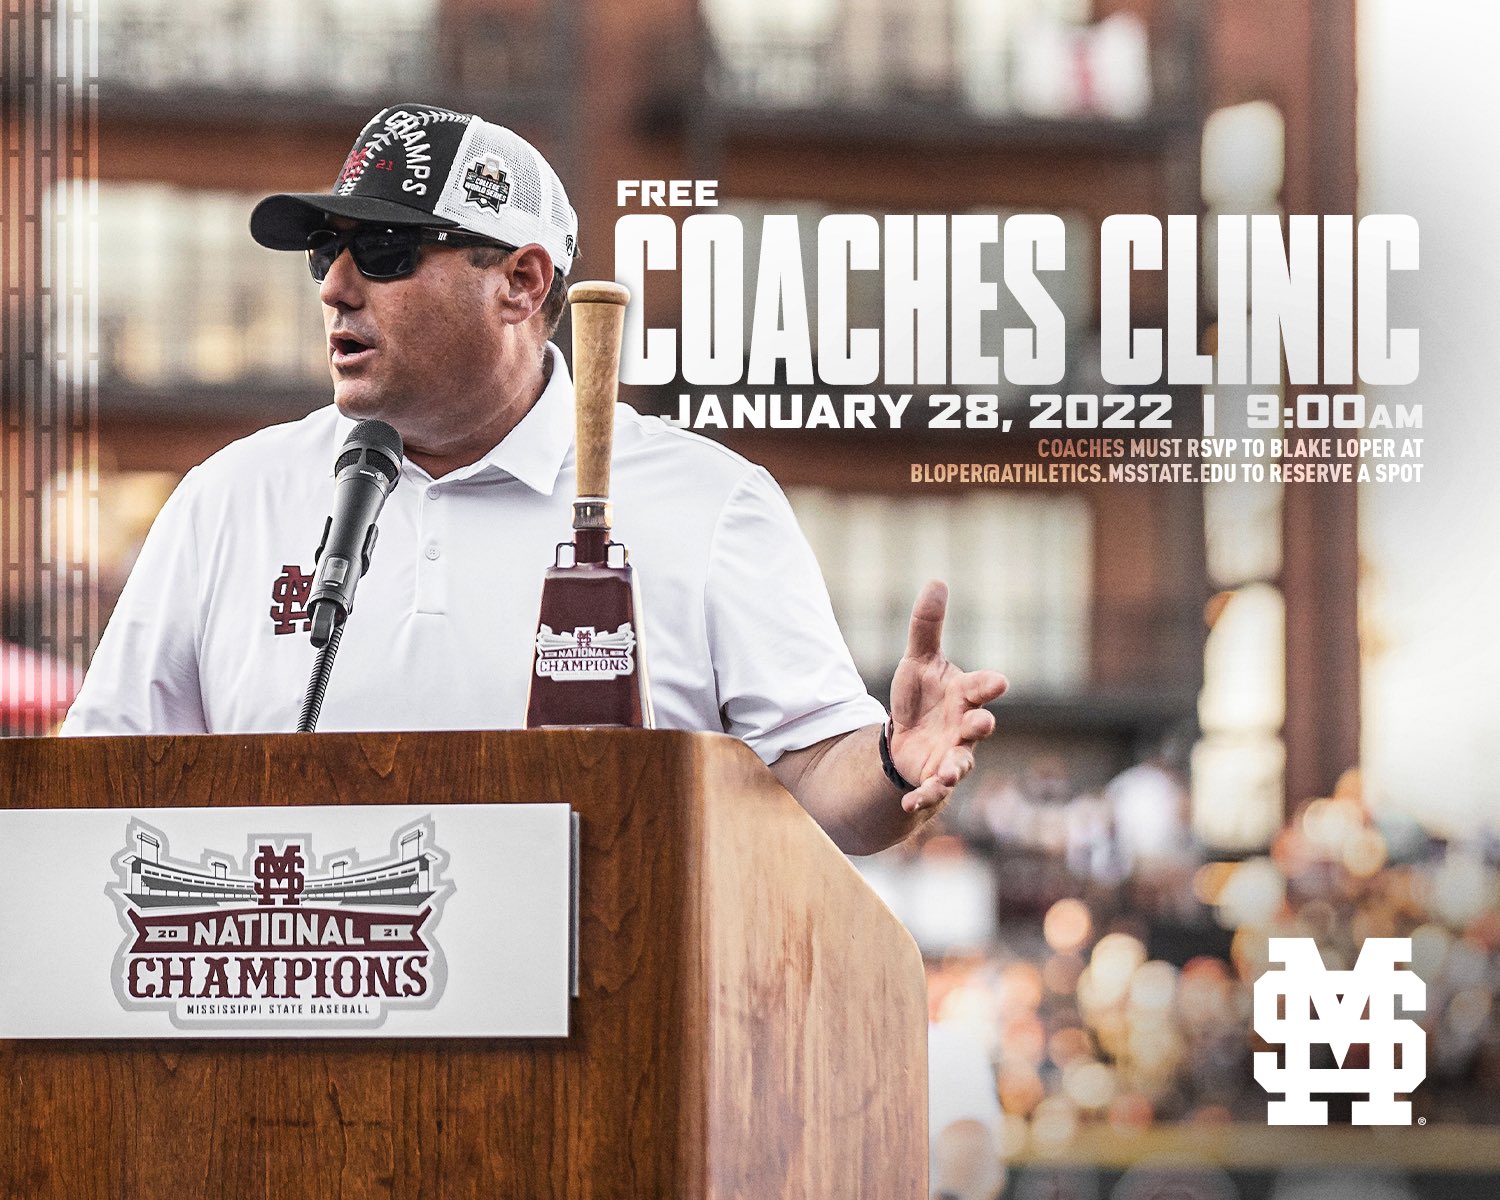 Free Coaches Clinic graphic with MSU Head Baseball Coach Chris Lemonis speaking at a podium on Dudy Noble Field